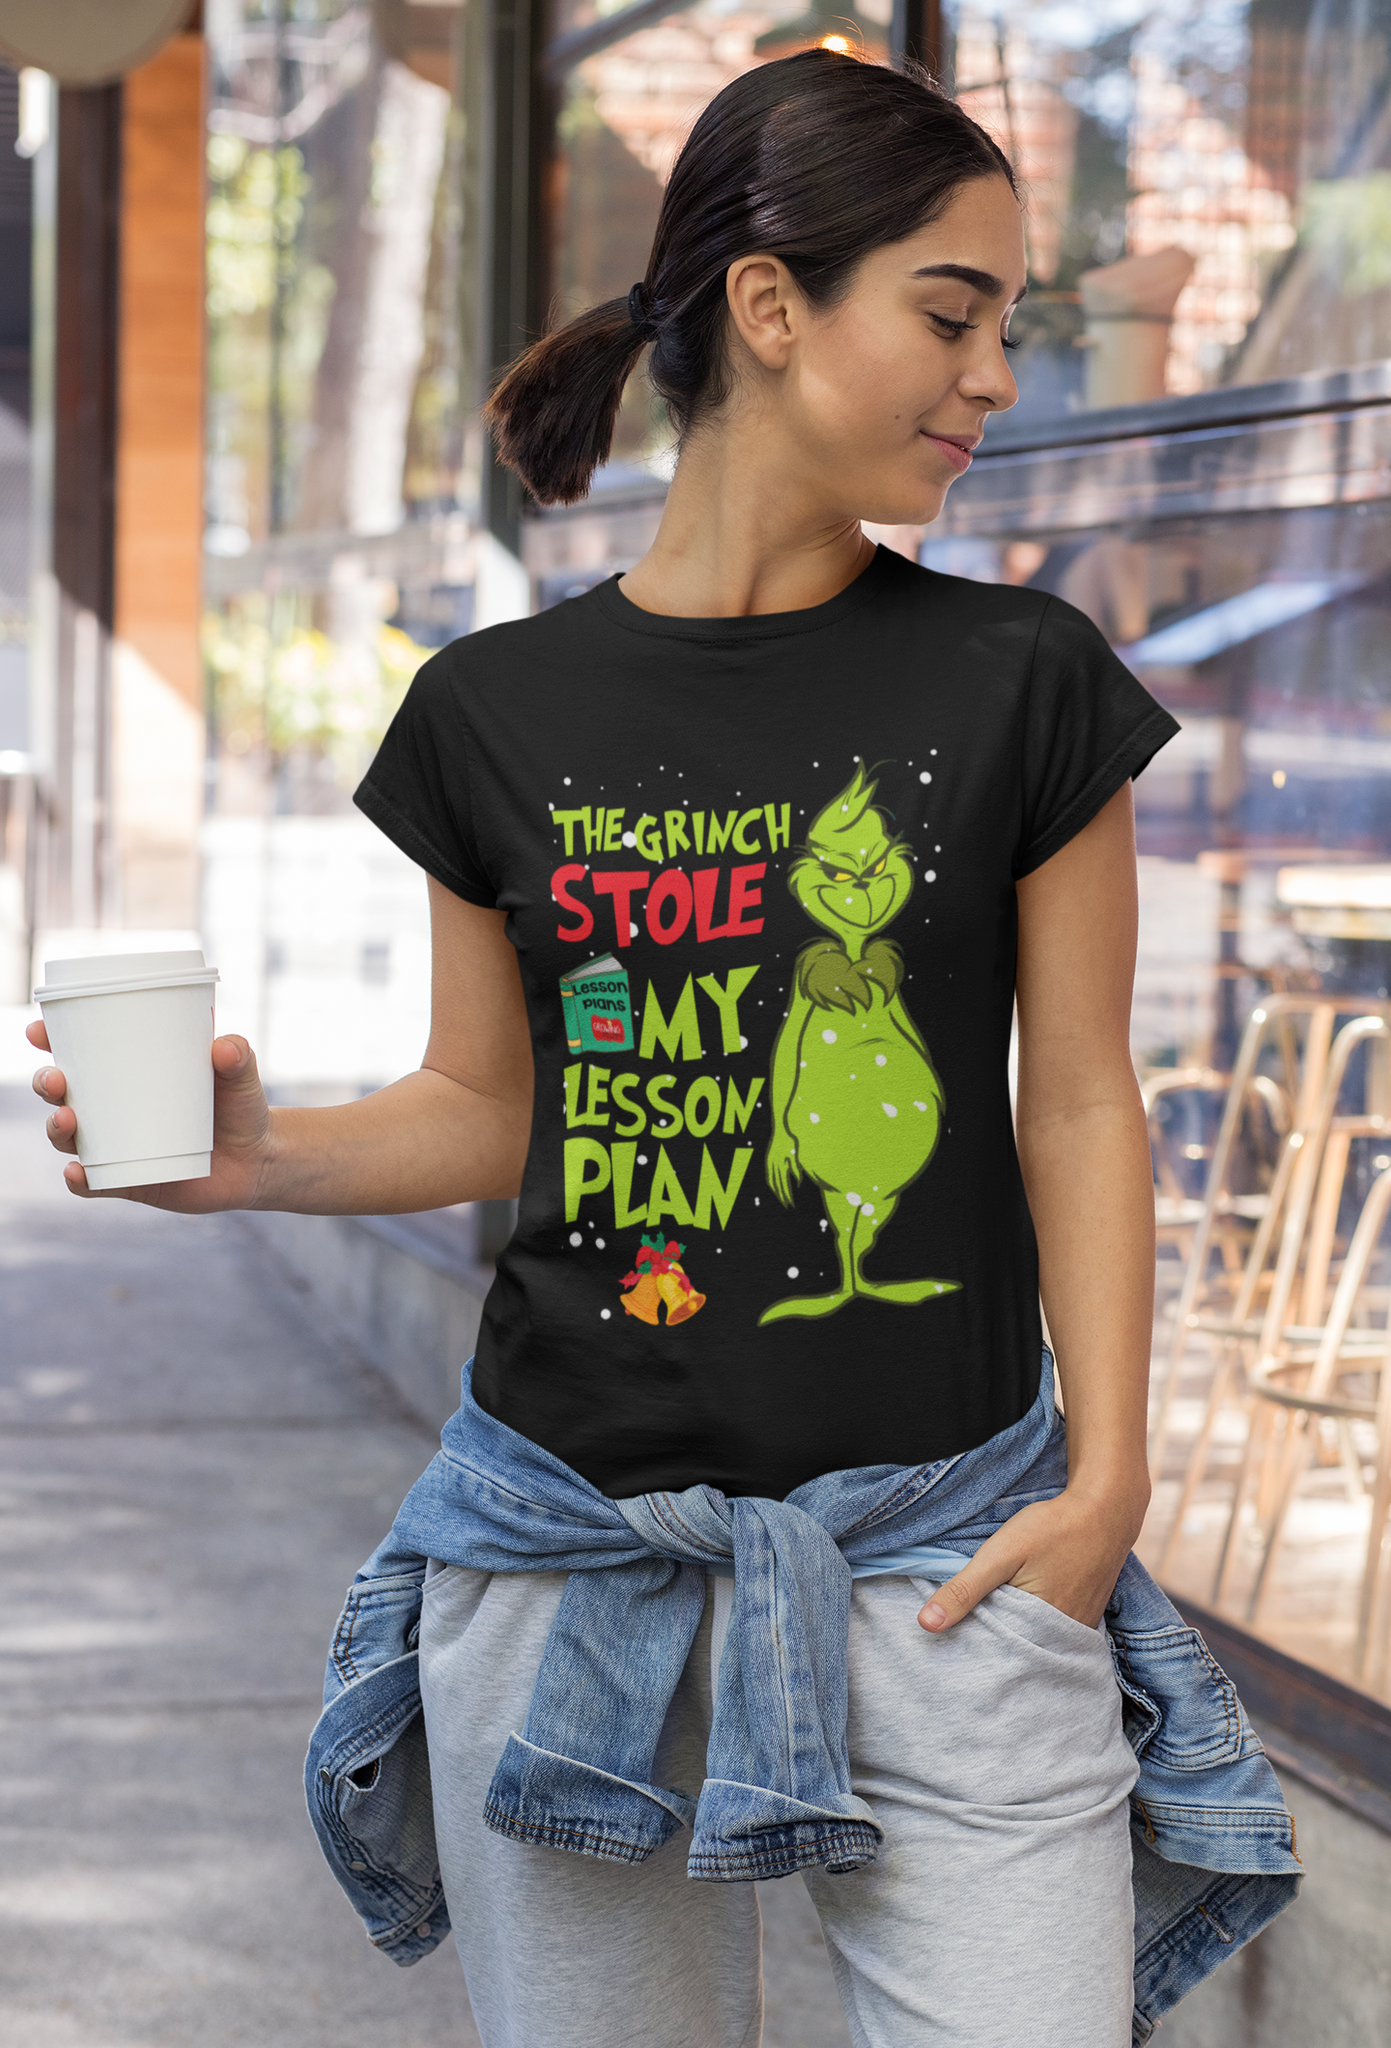 Grinch T Shirt, The Grinch Stole My Lesson Plan Tshirt, Christmas Movie Shirt, Christmas Gifts